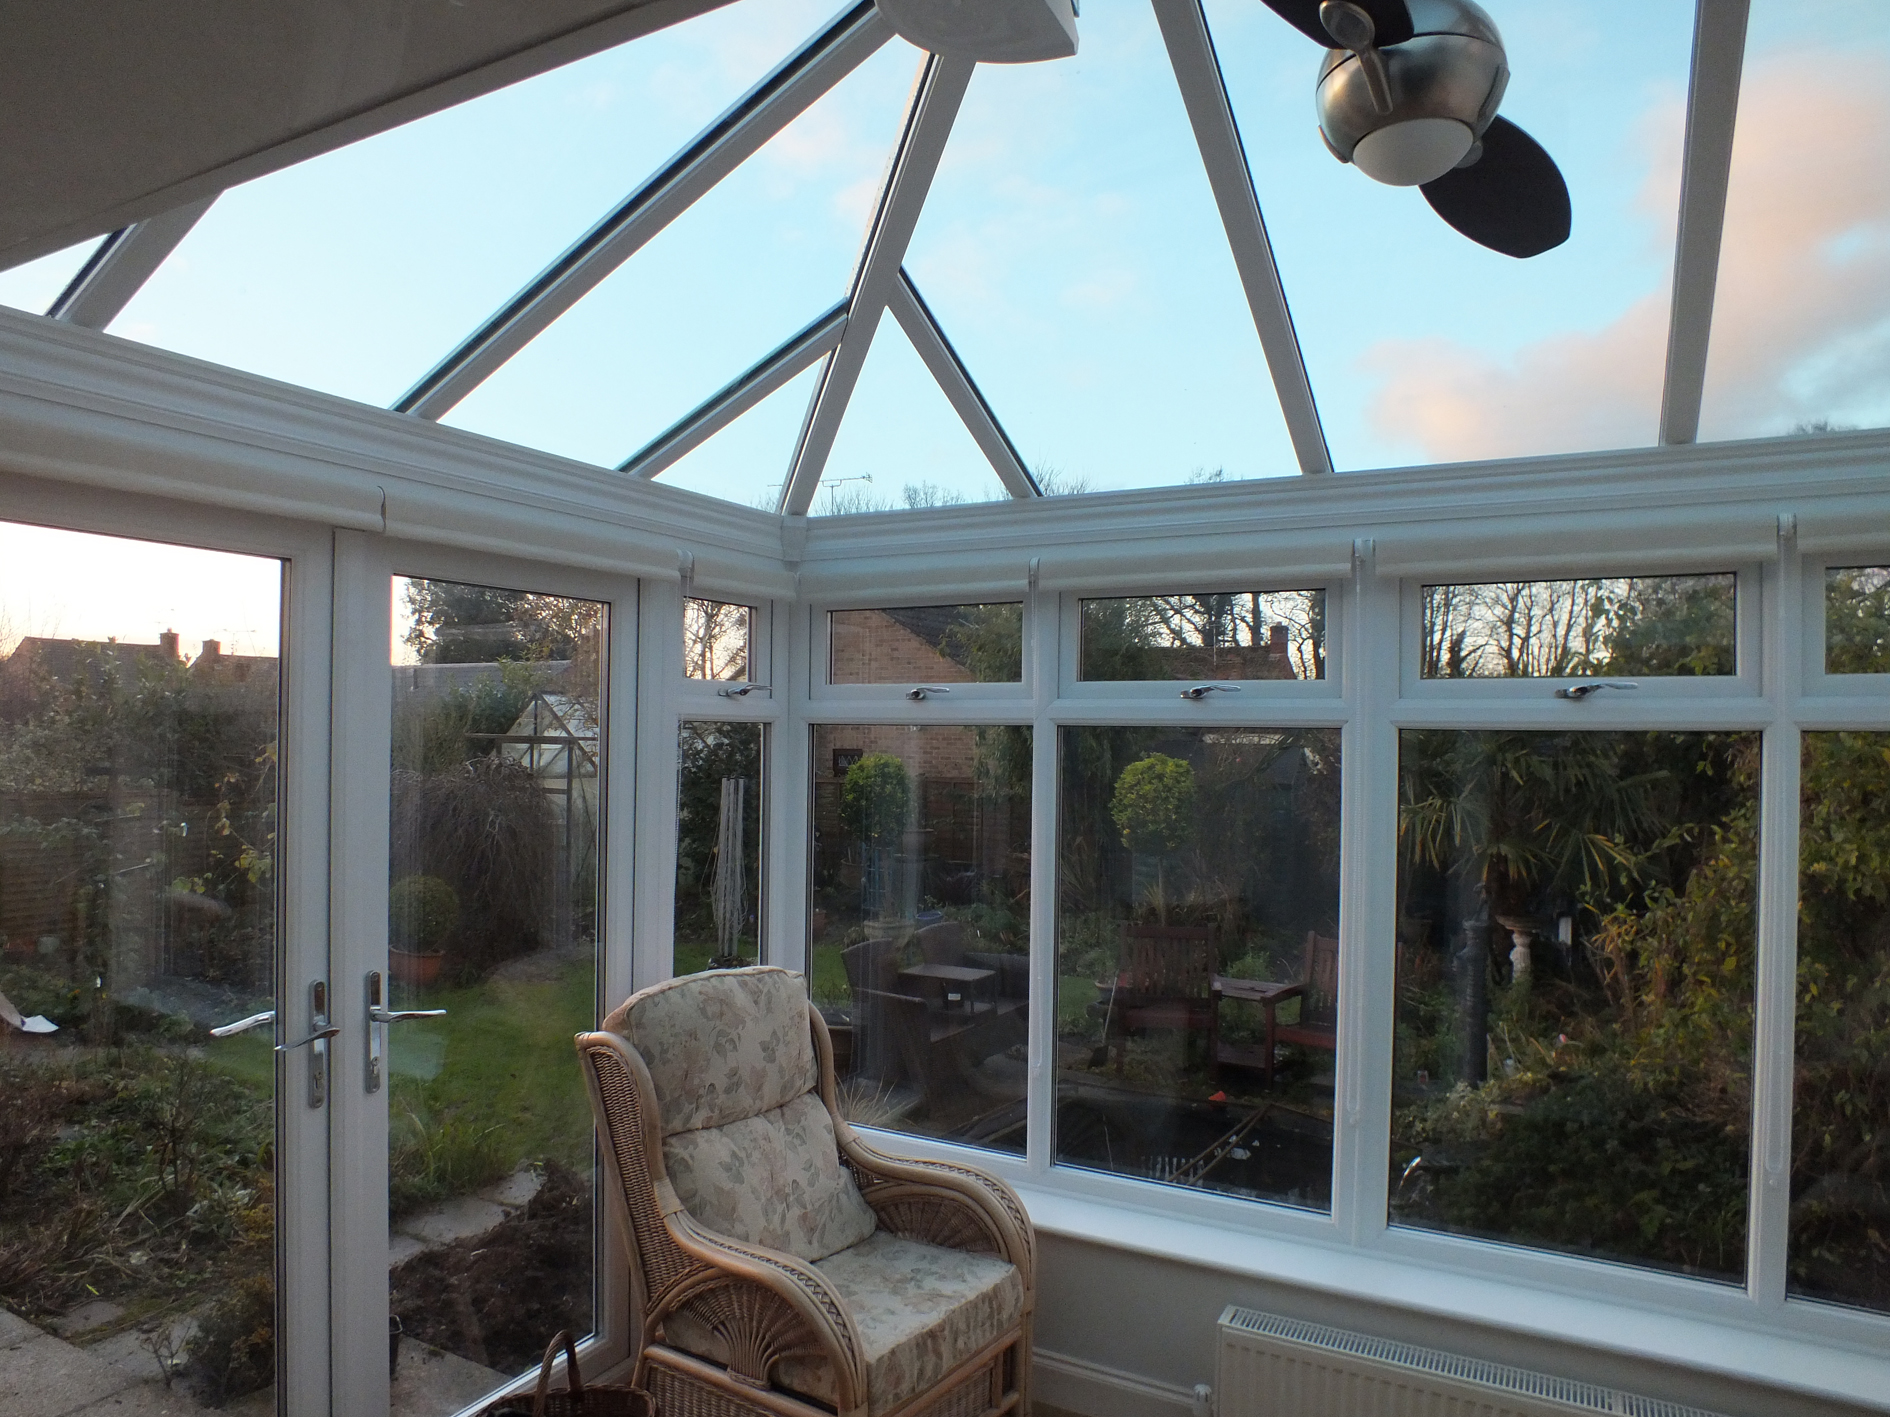 Conservatory roof glass fitted with blue 25 solar window film for glare issues Tinting Express Ltd Barnstaple UK